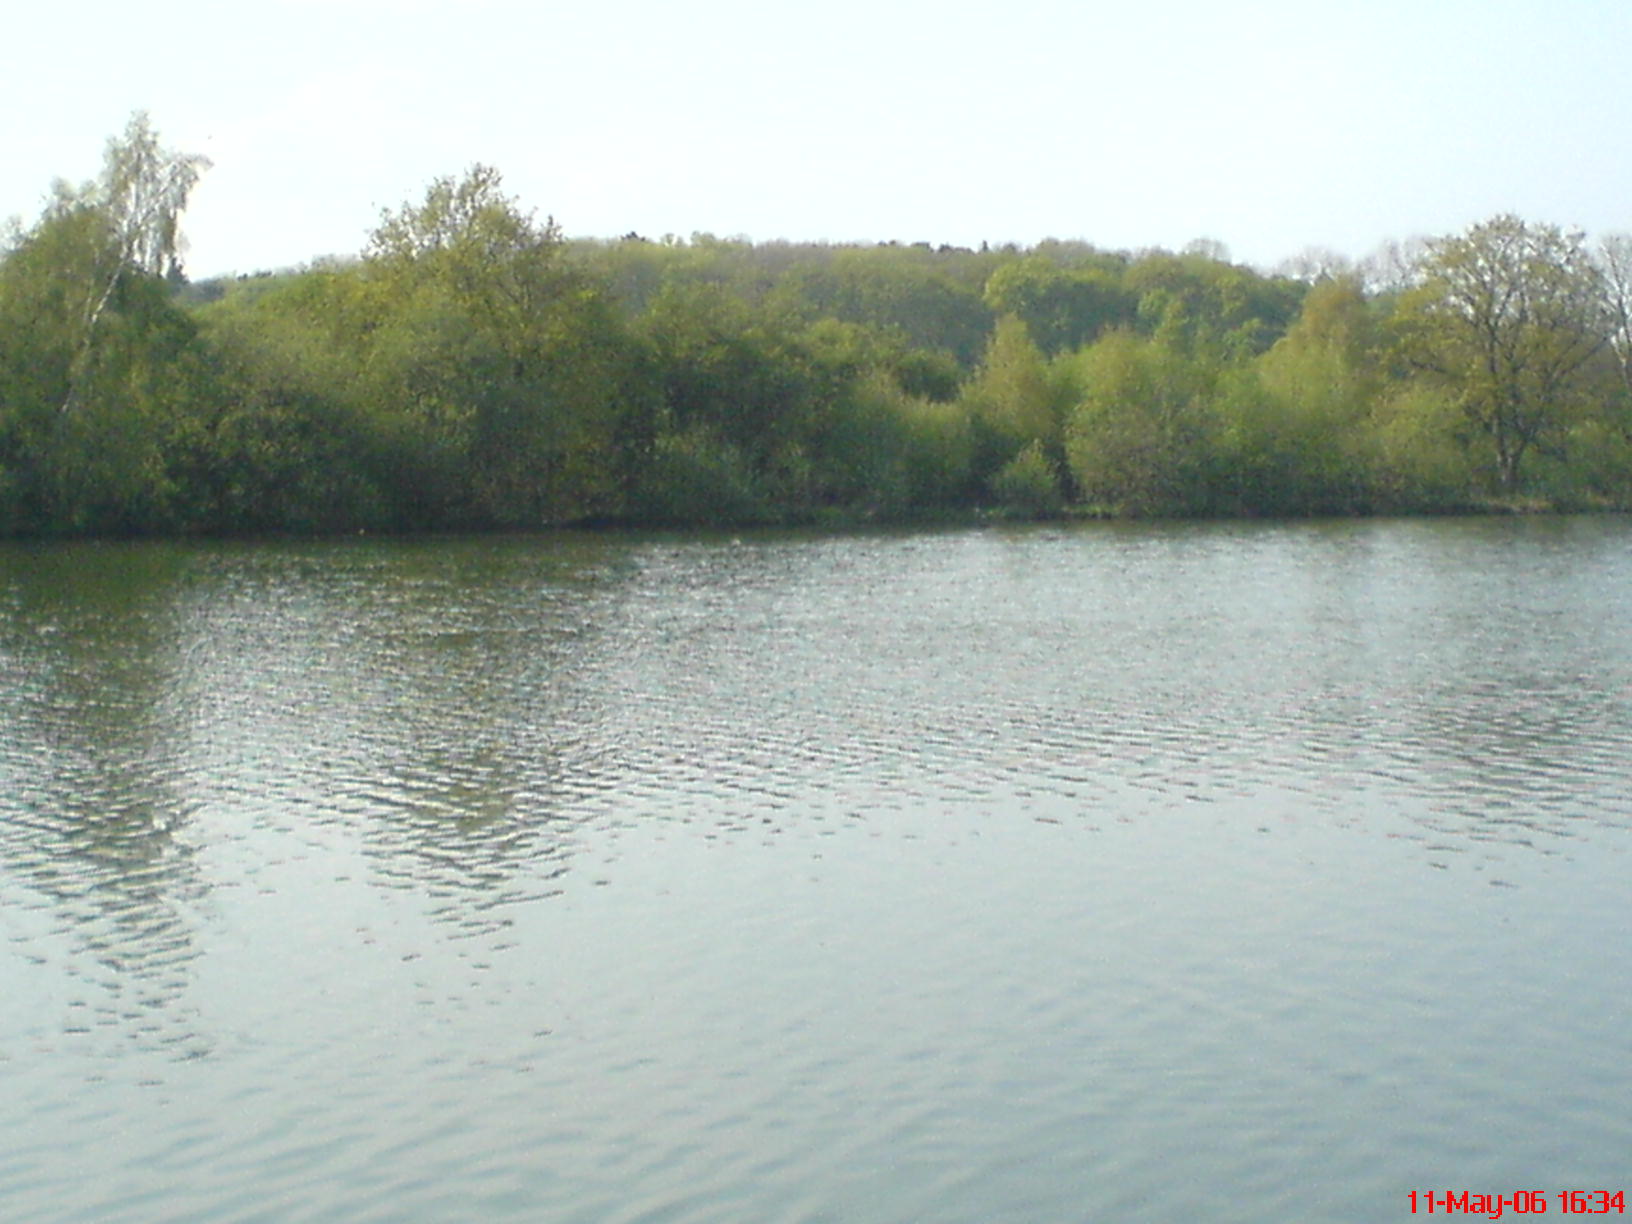 a lake with water is surrounded by some trees